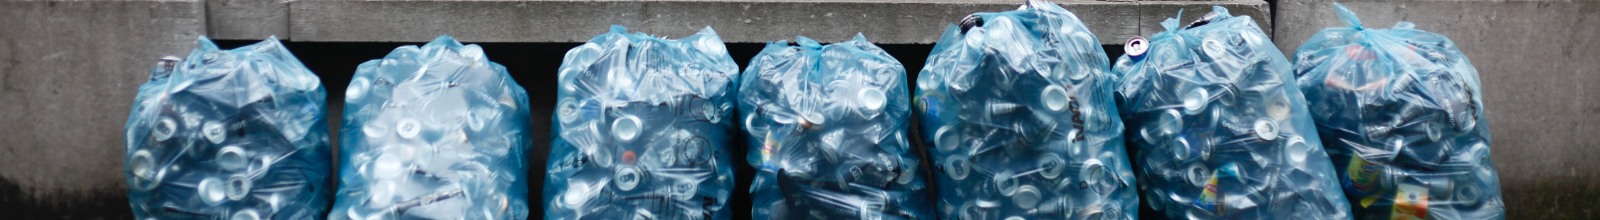 A line of clear trash bags holding recycling 